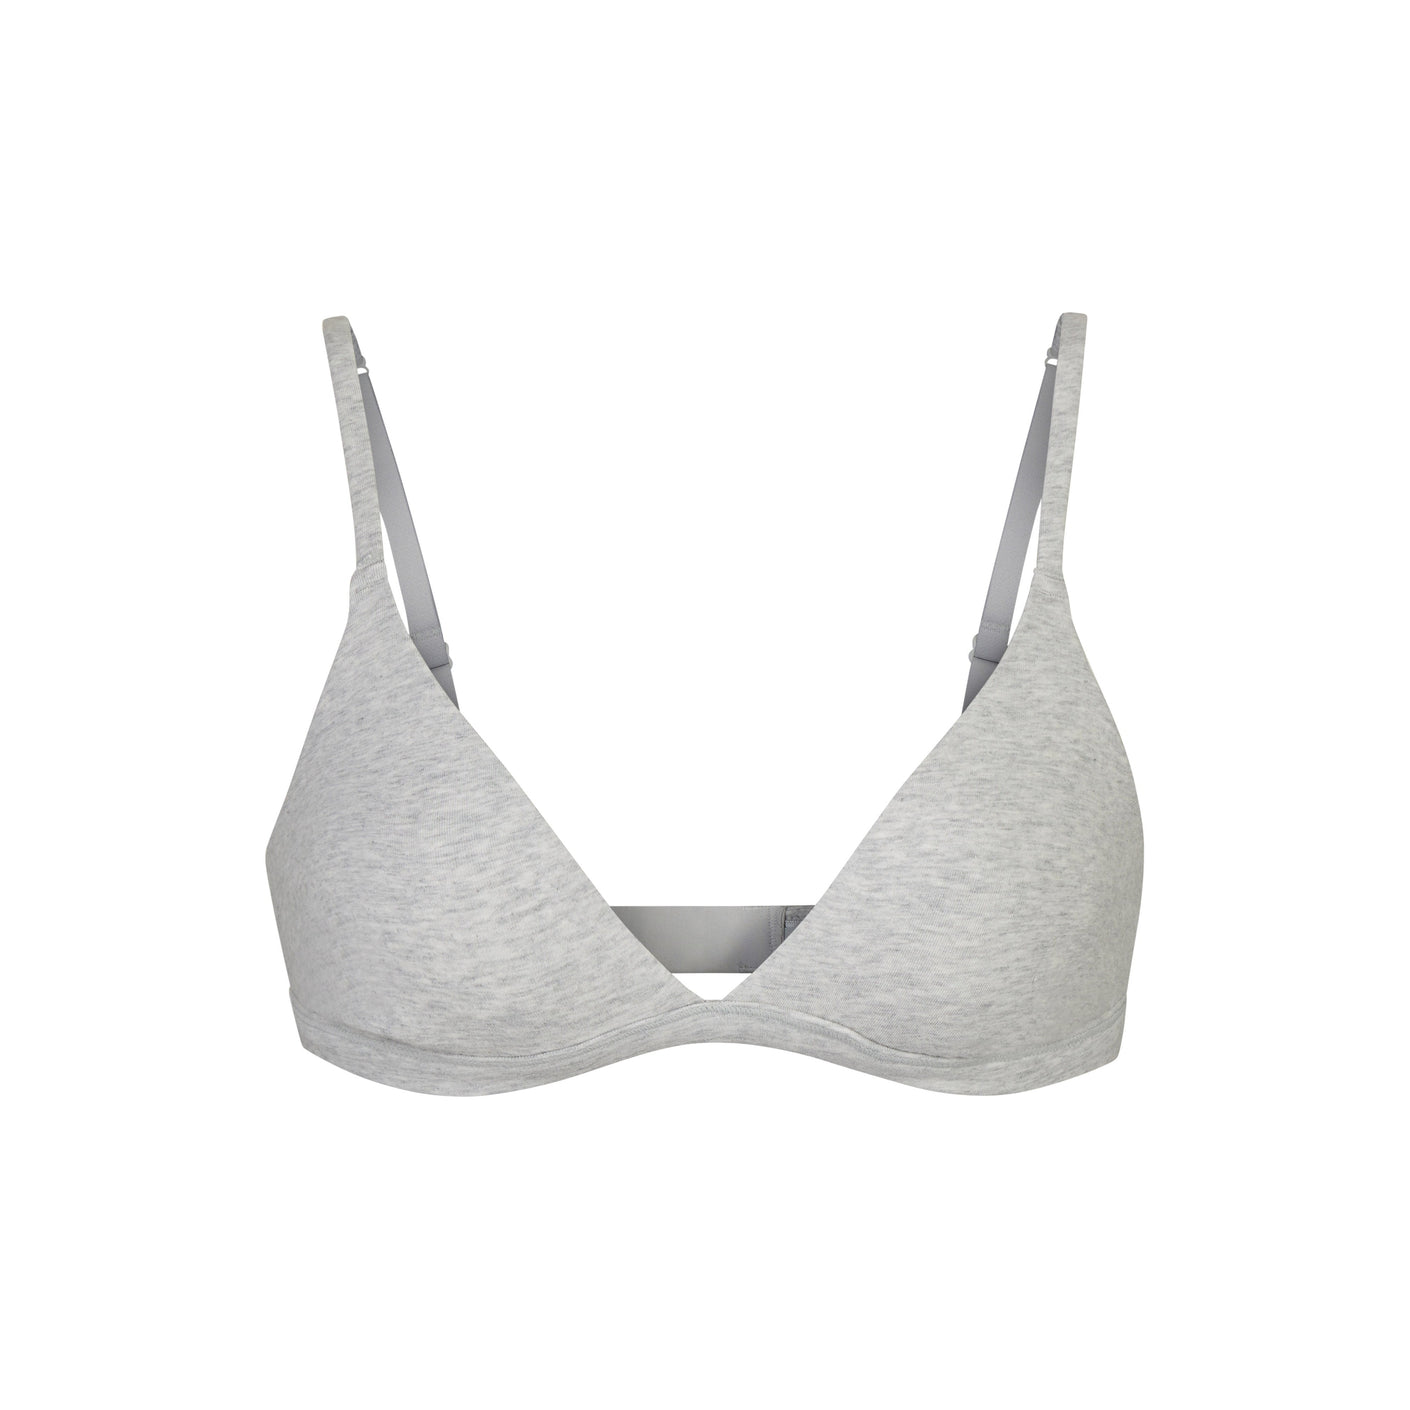 butwhatshouldiwear wears the Cotton Triangle Bralette and Cotton Rib Brief  in Bone — available now in sizes XXS - 4X at SKIMS.COM.